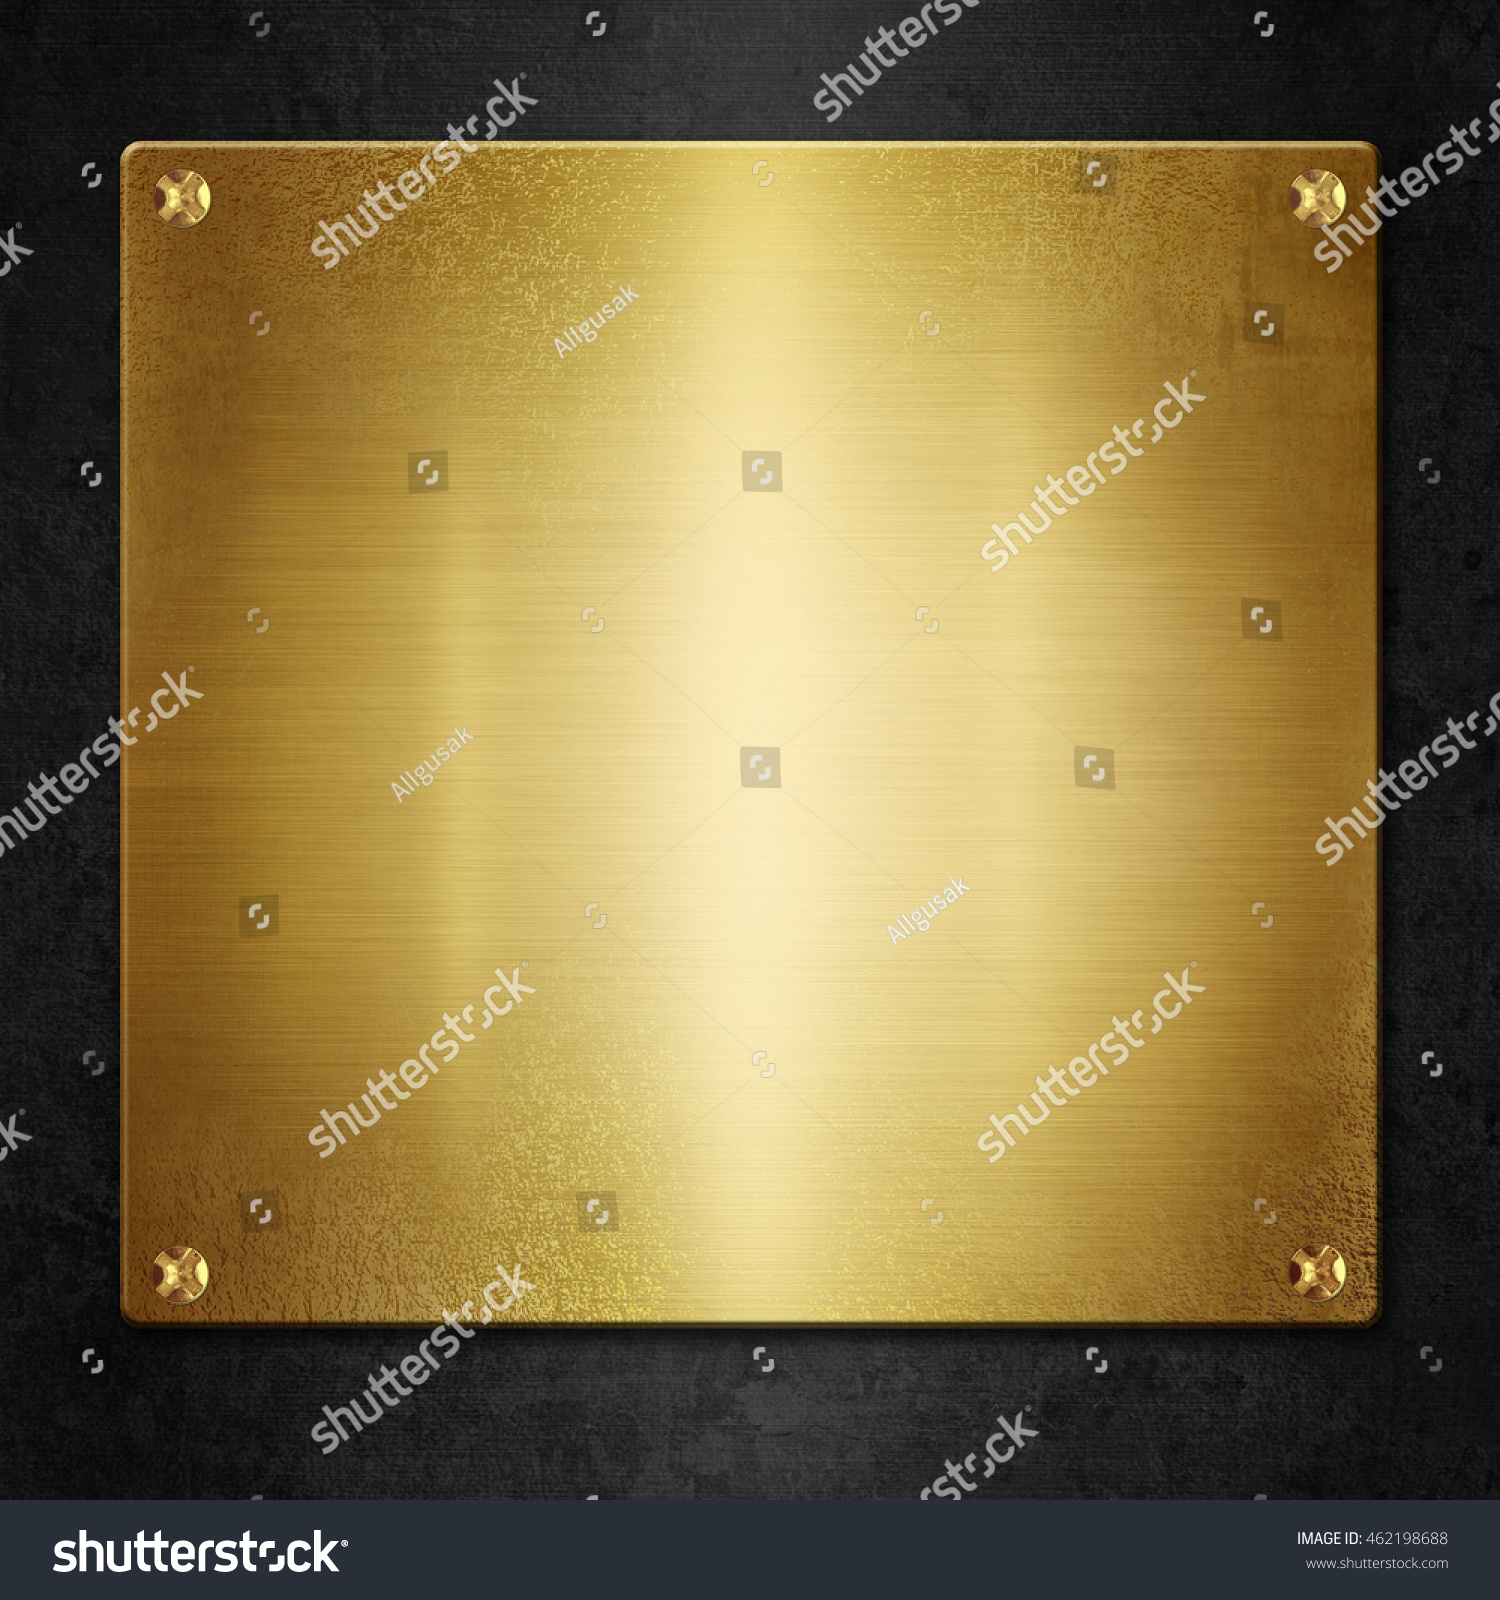 Gold plate texture on black background - Royalty Free Stock Photo ...